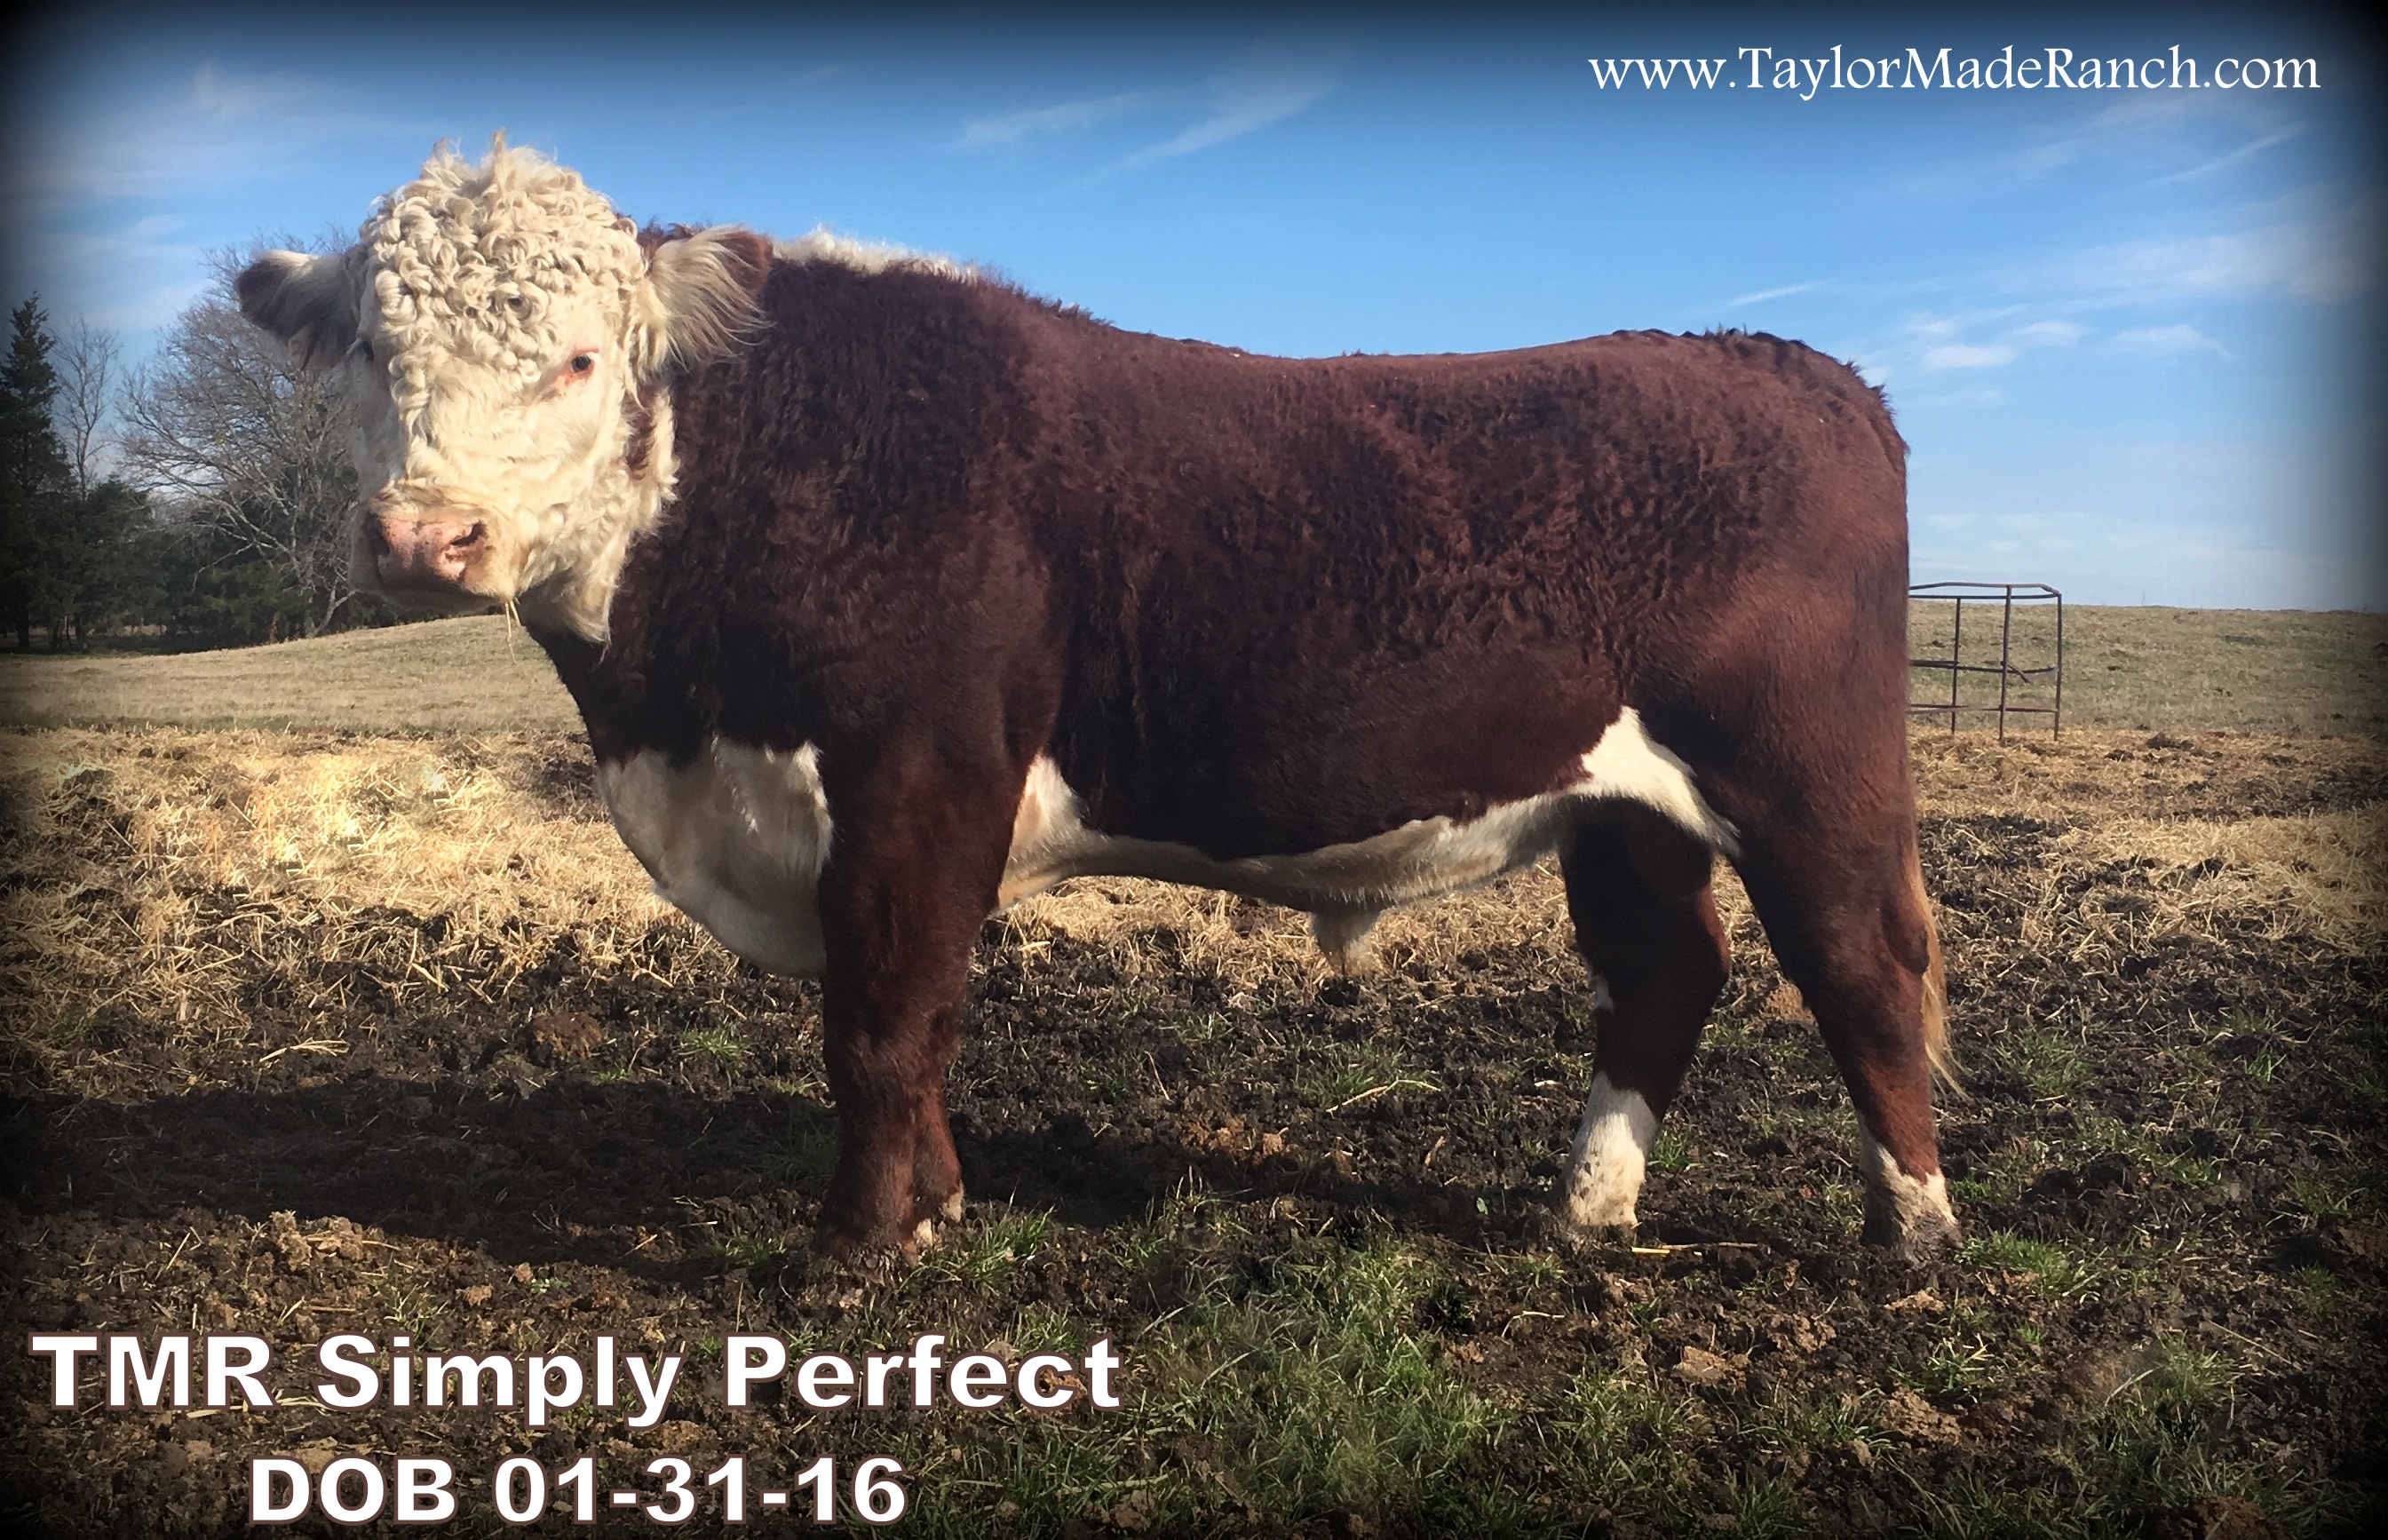 TMR Simply Perfect - Registered Polled Hereford Bull from Taylor-Made Ranch, LLC